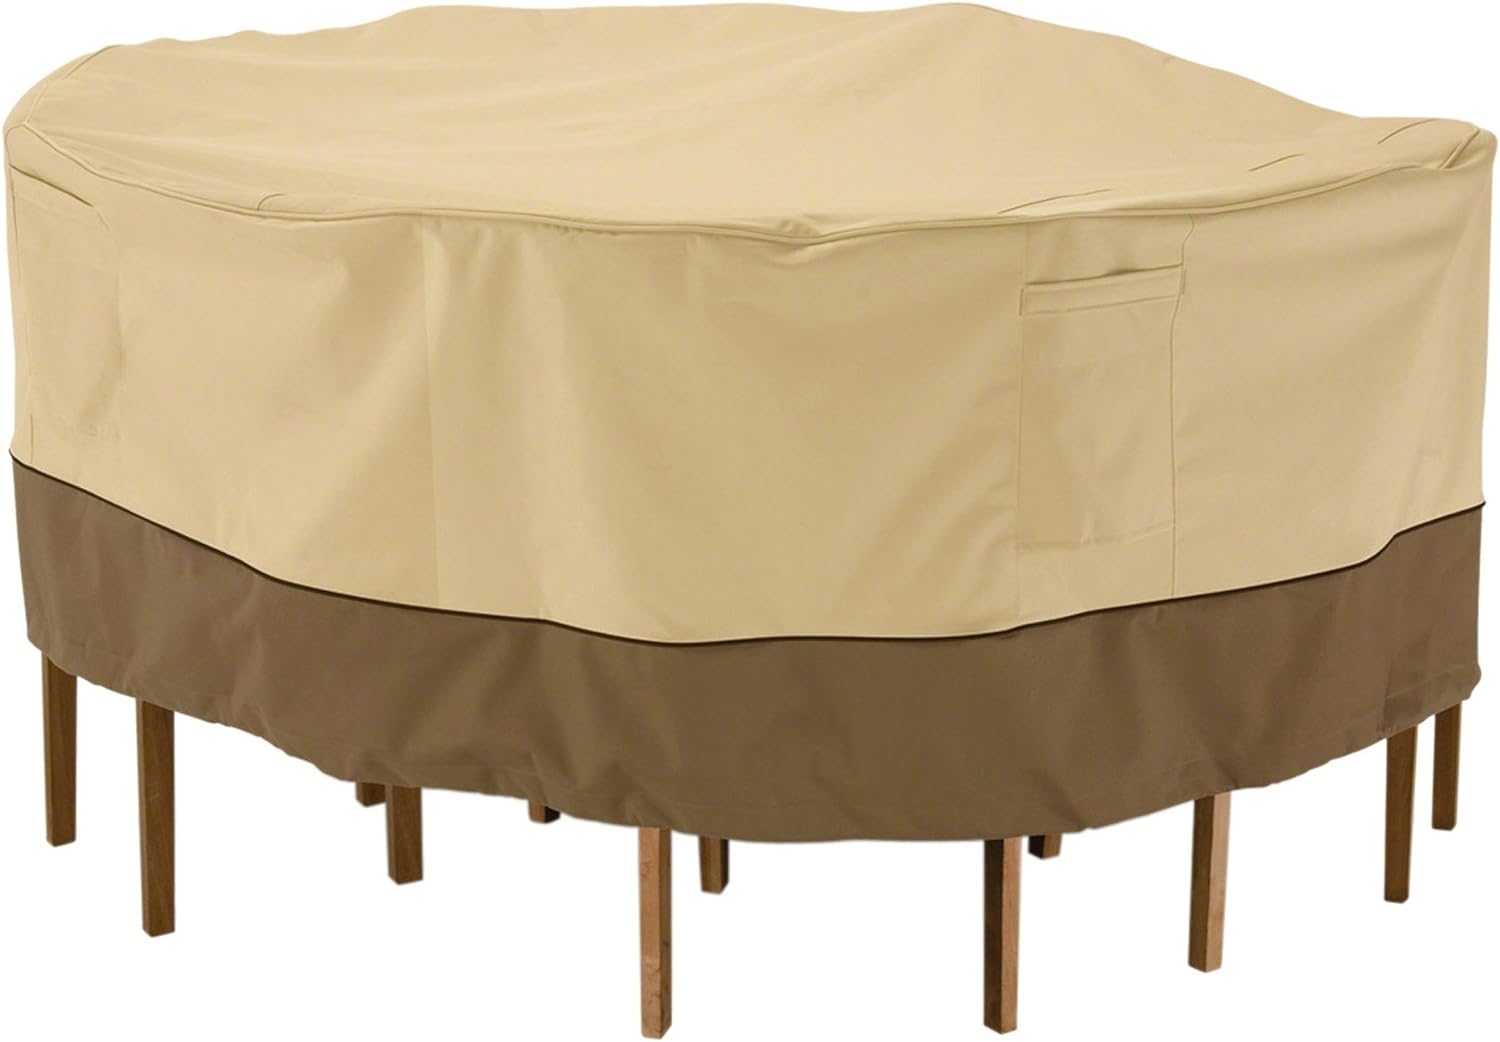 Classic Accessories 71922 Veranda Round Patio Table and Chair Set Cover, Tall